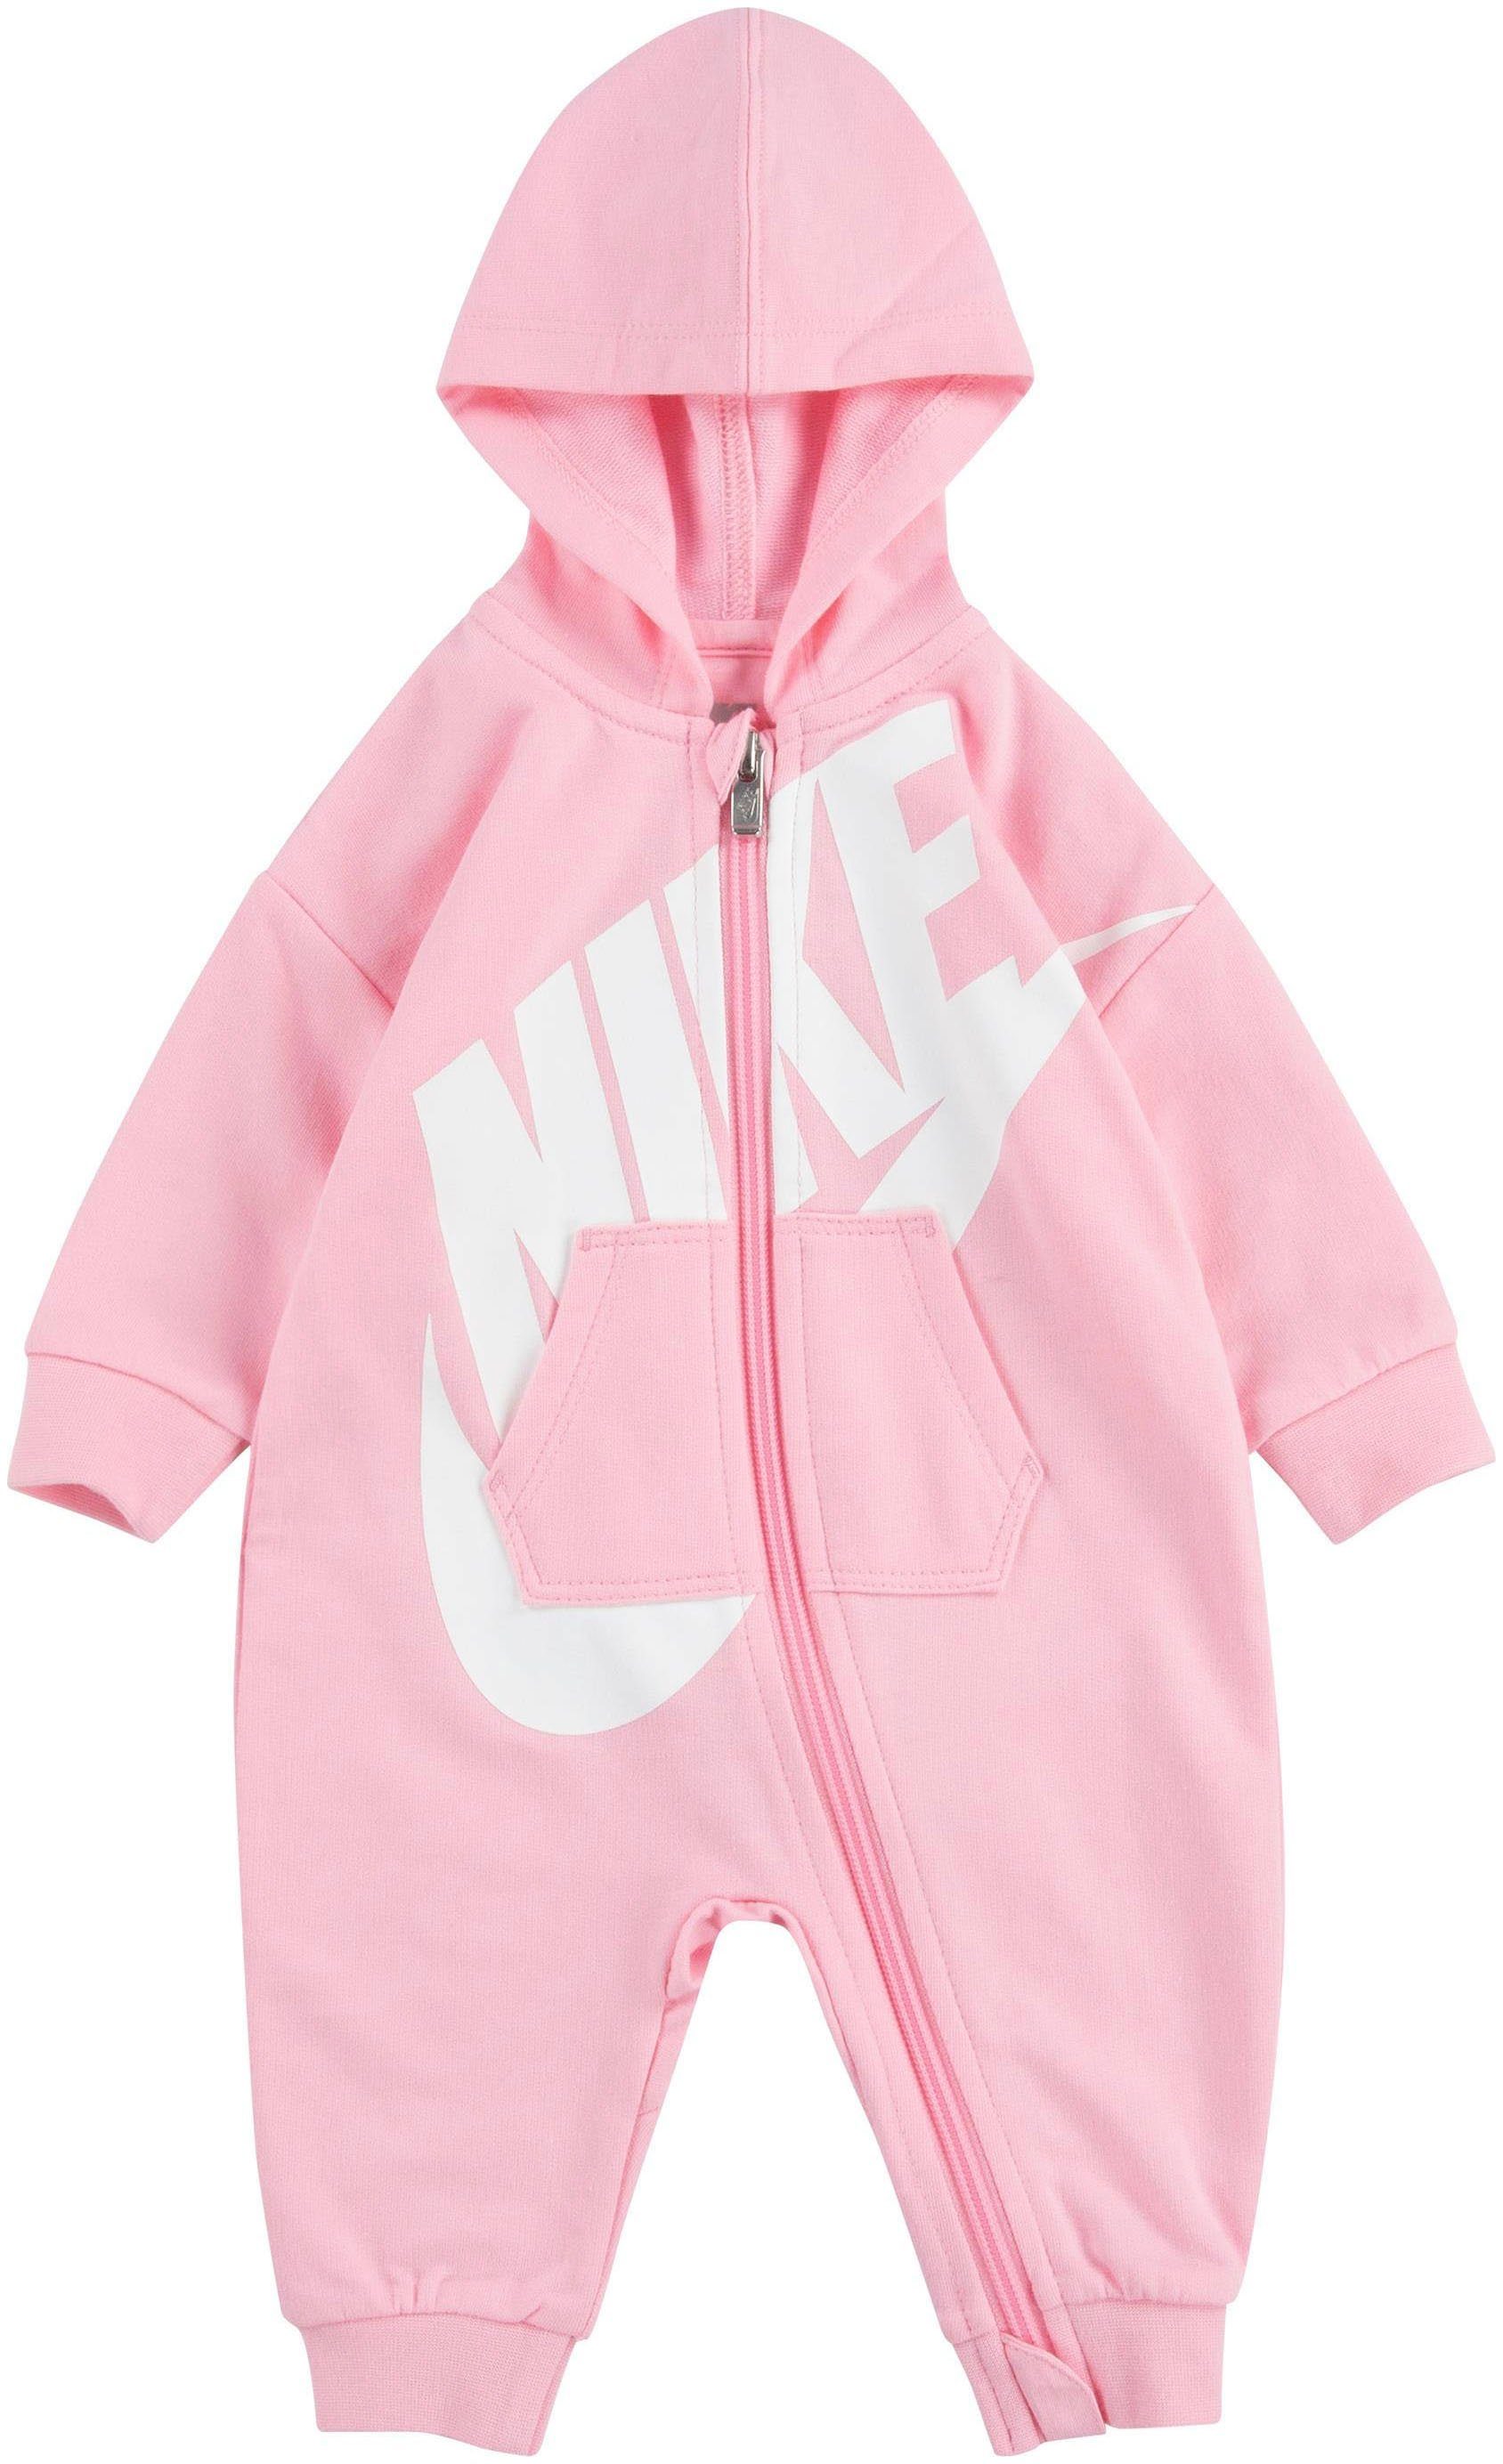 Nike NKN DAY Sportswear COVERALL PLAY ALL rosa-weiß Strampler